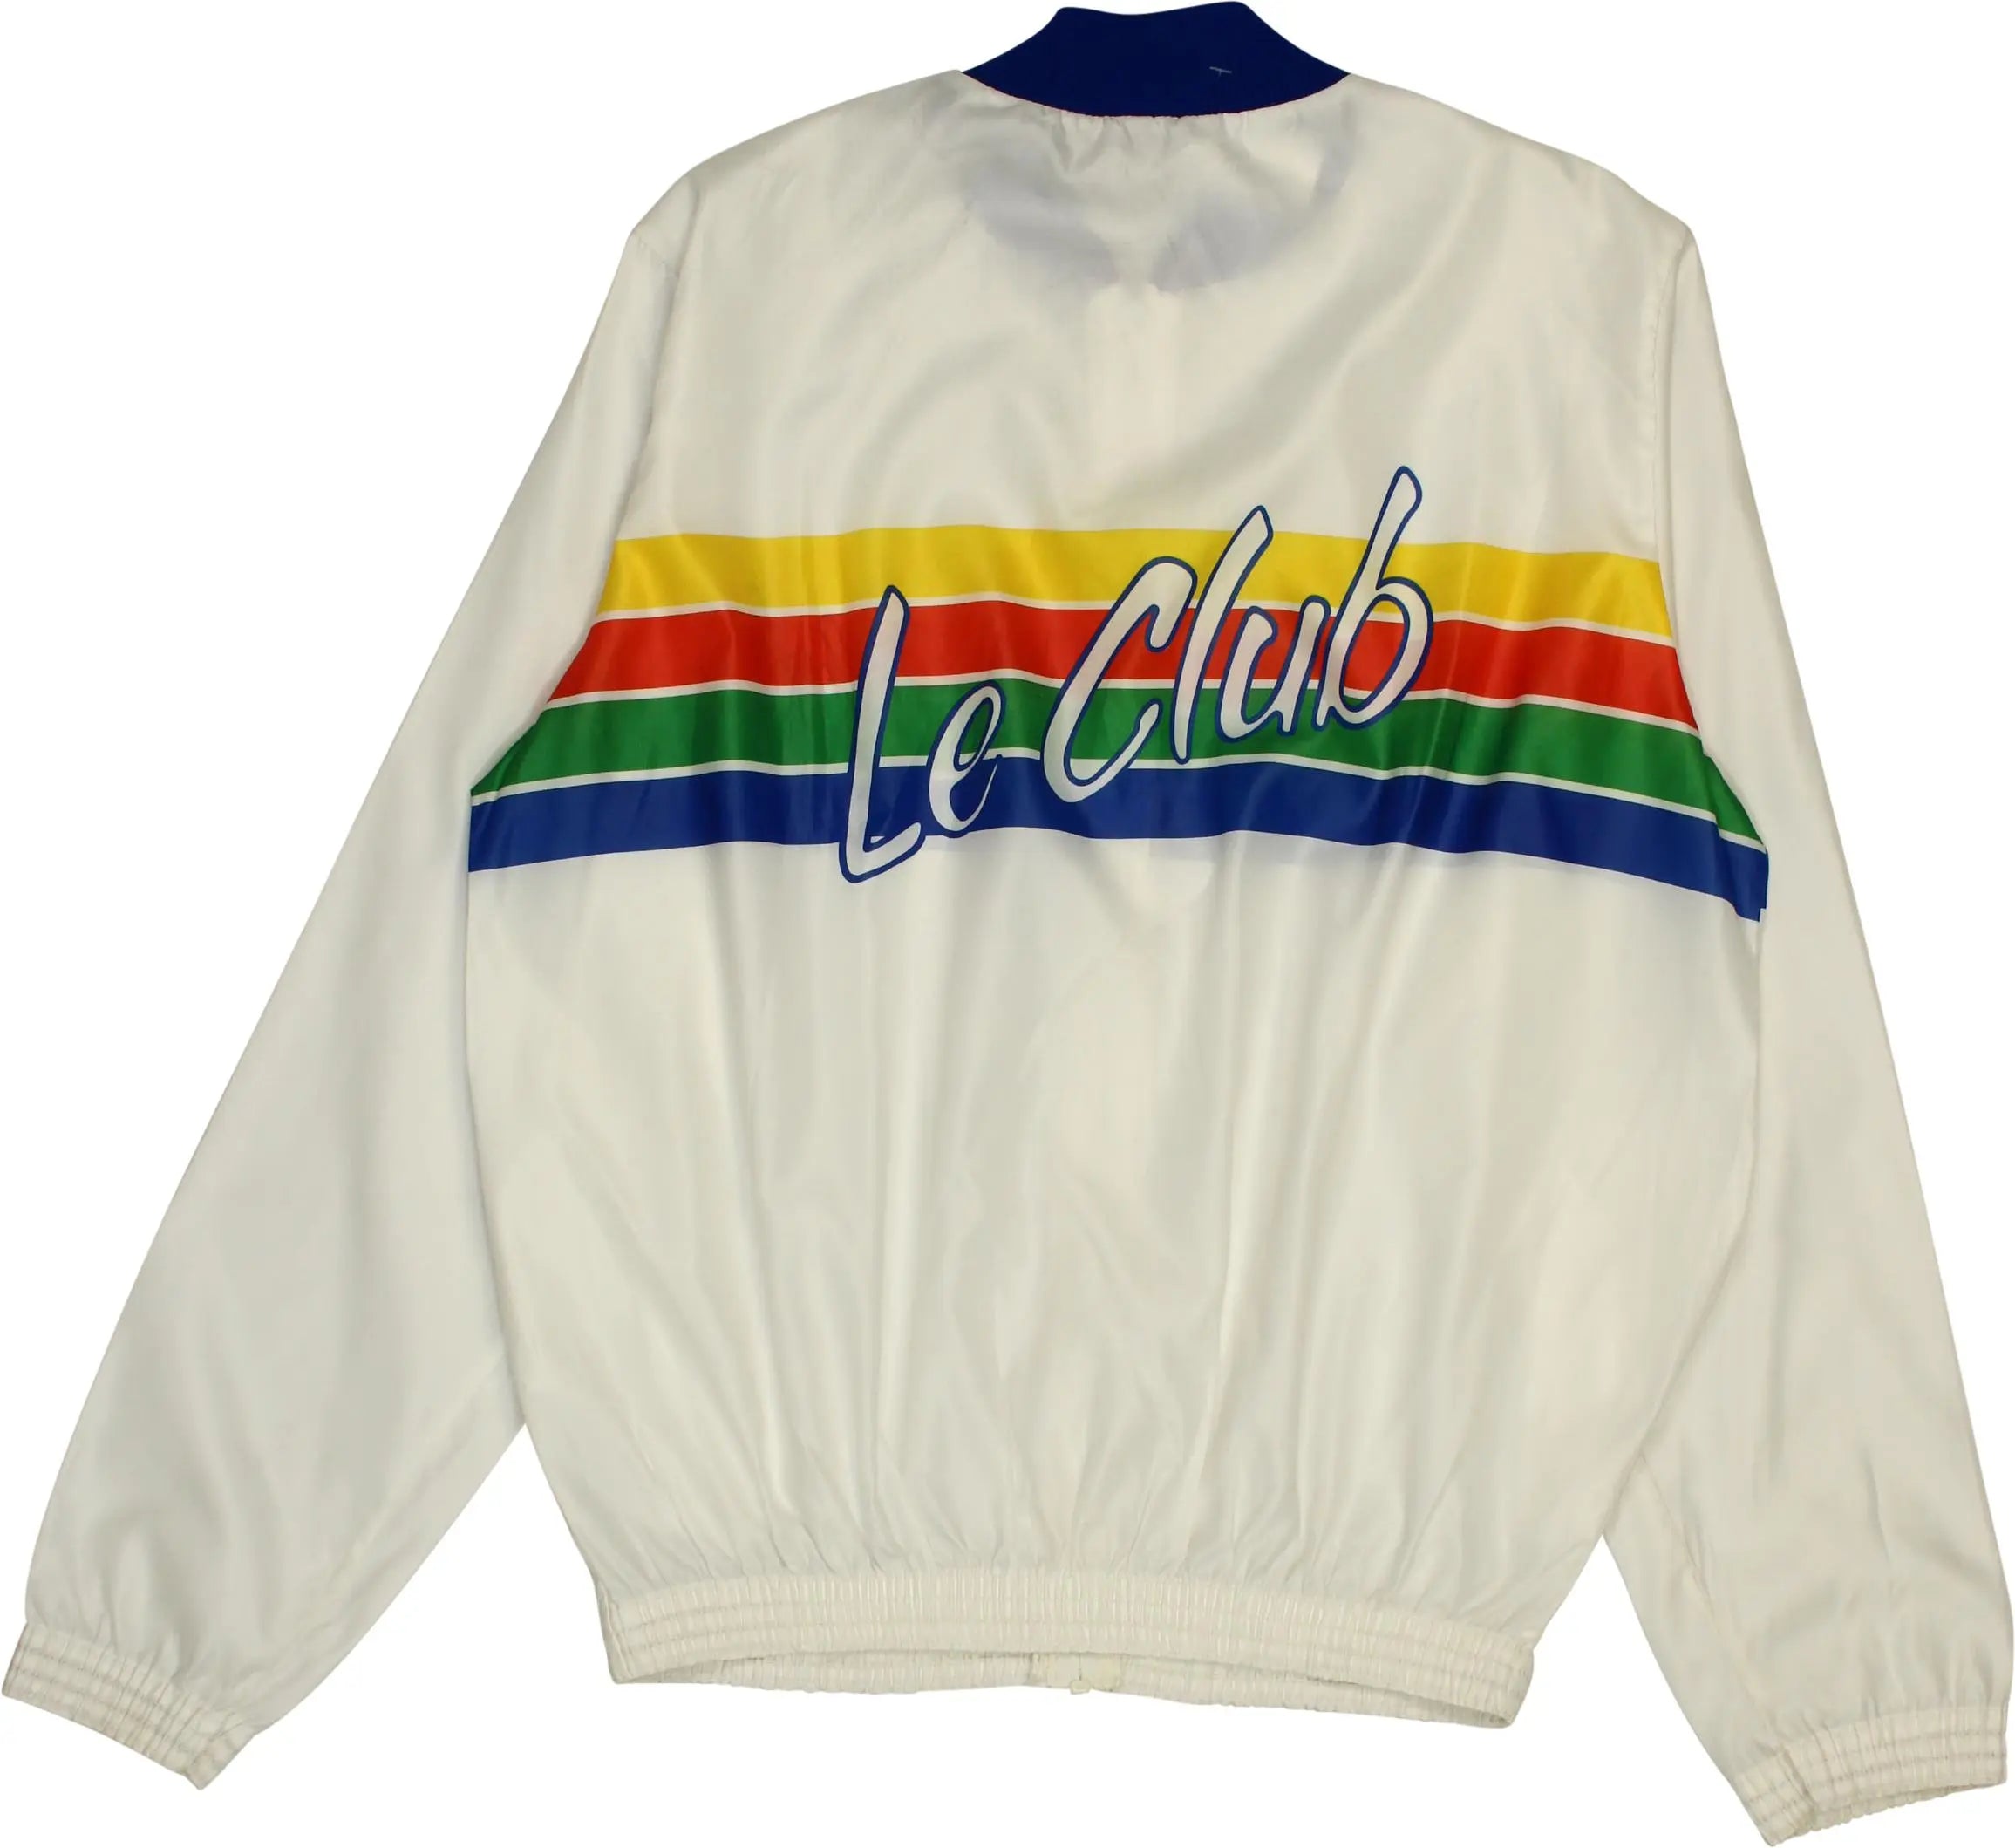 Unknown - White track jacket- ThriftTale.com - Vintage and second handclothing